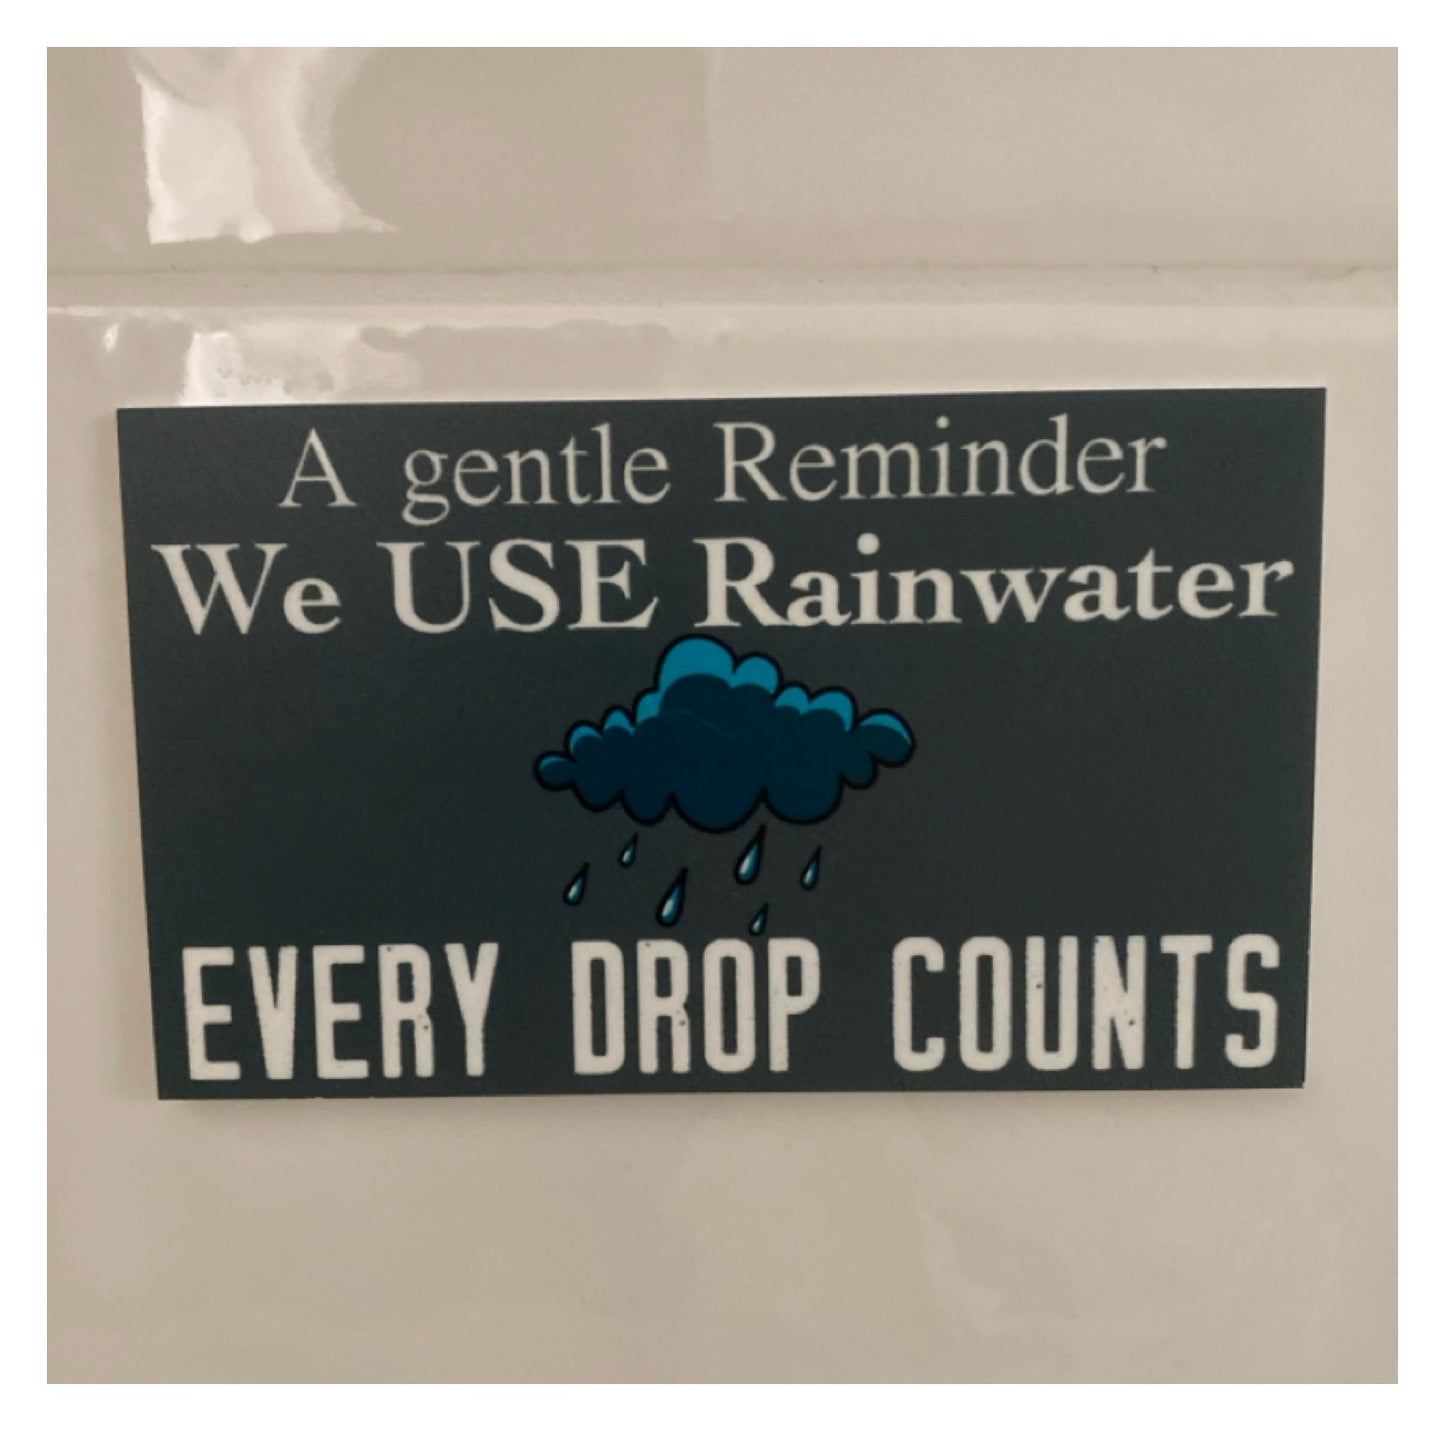 Rainwater In Use Every Drop Counts Eco Water Tank Sign - The Renmy Store Homewares & Gifts 